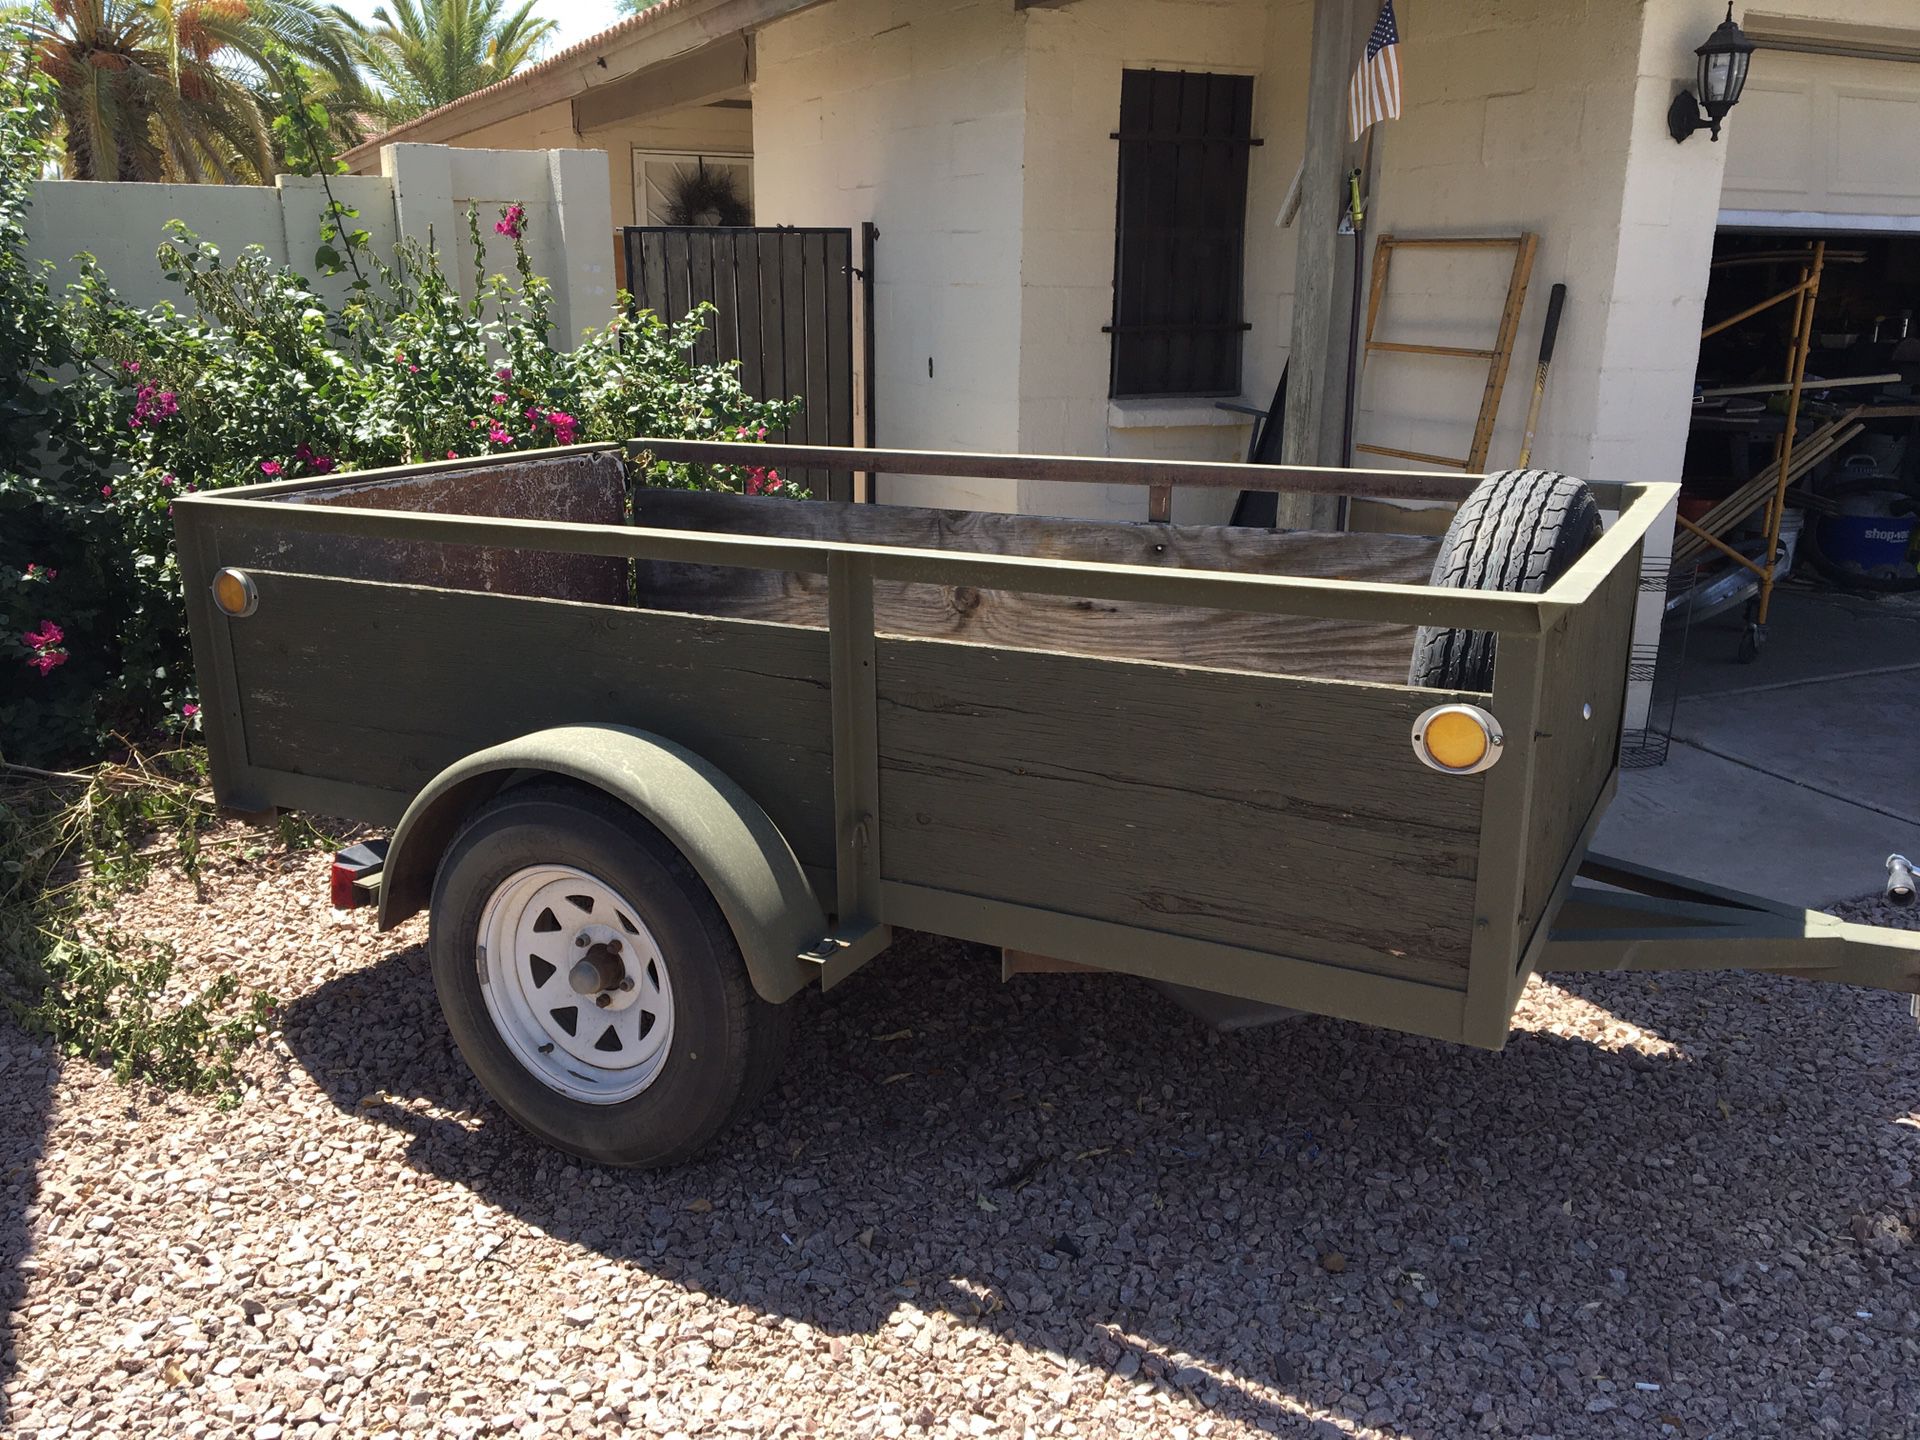 4x8 open trailer new tires tows great. Trade for a enclosed box trailer. Need one ASAP.